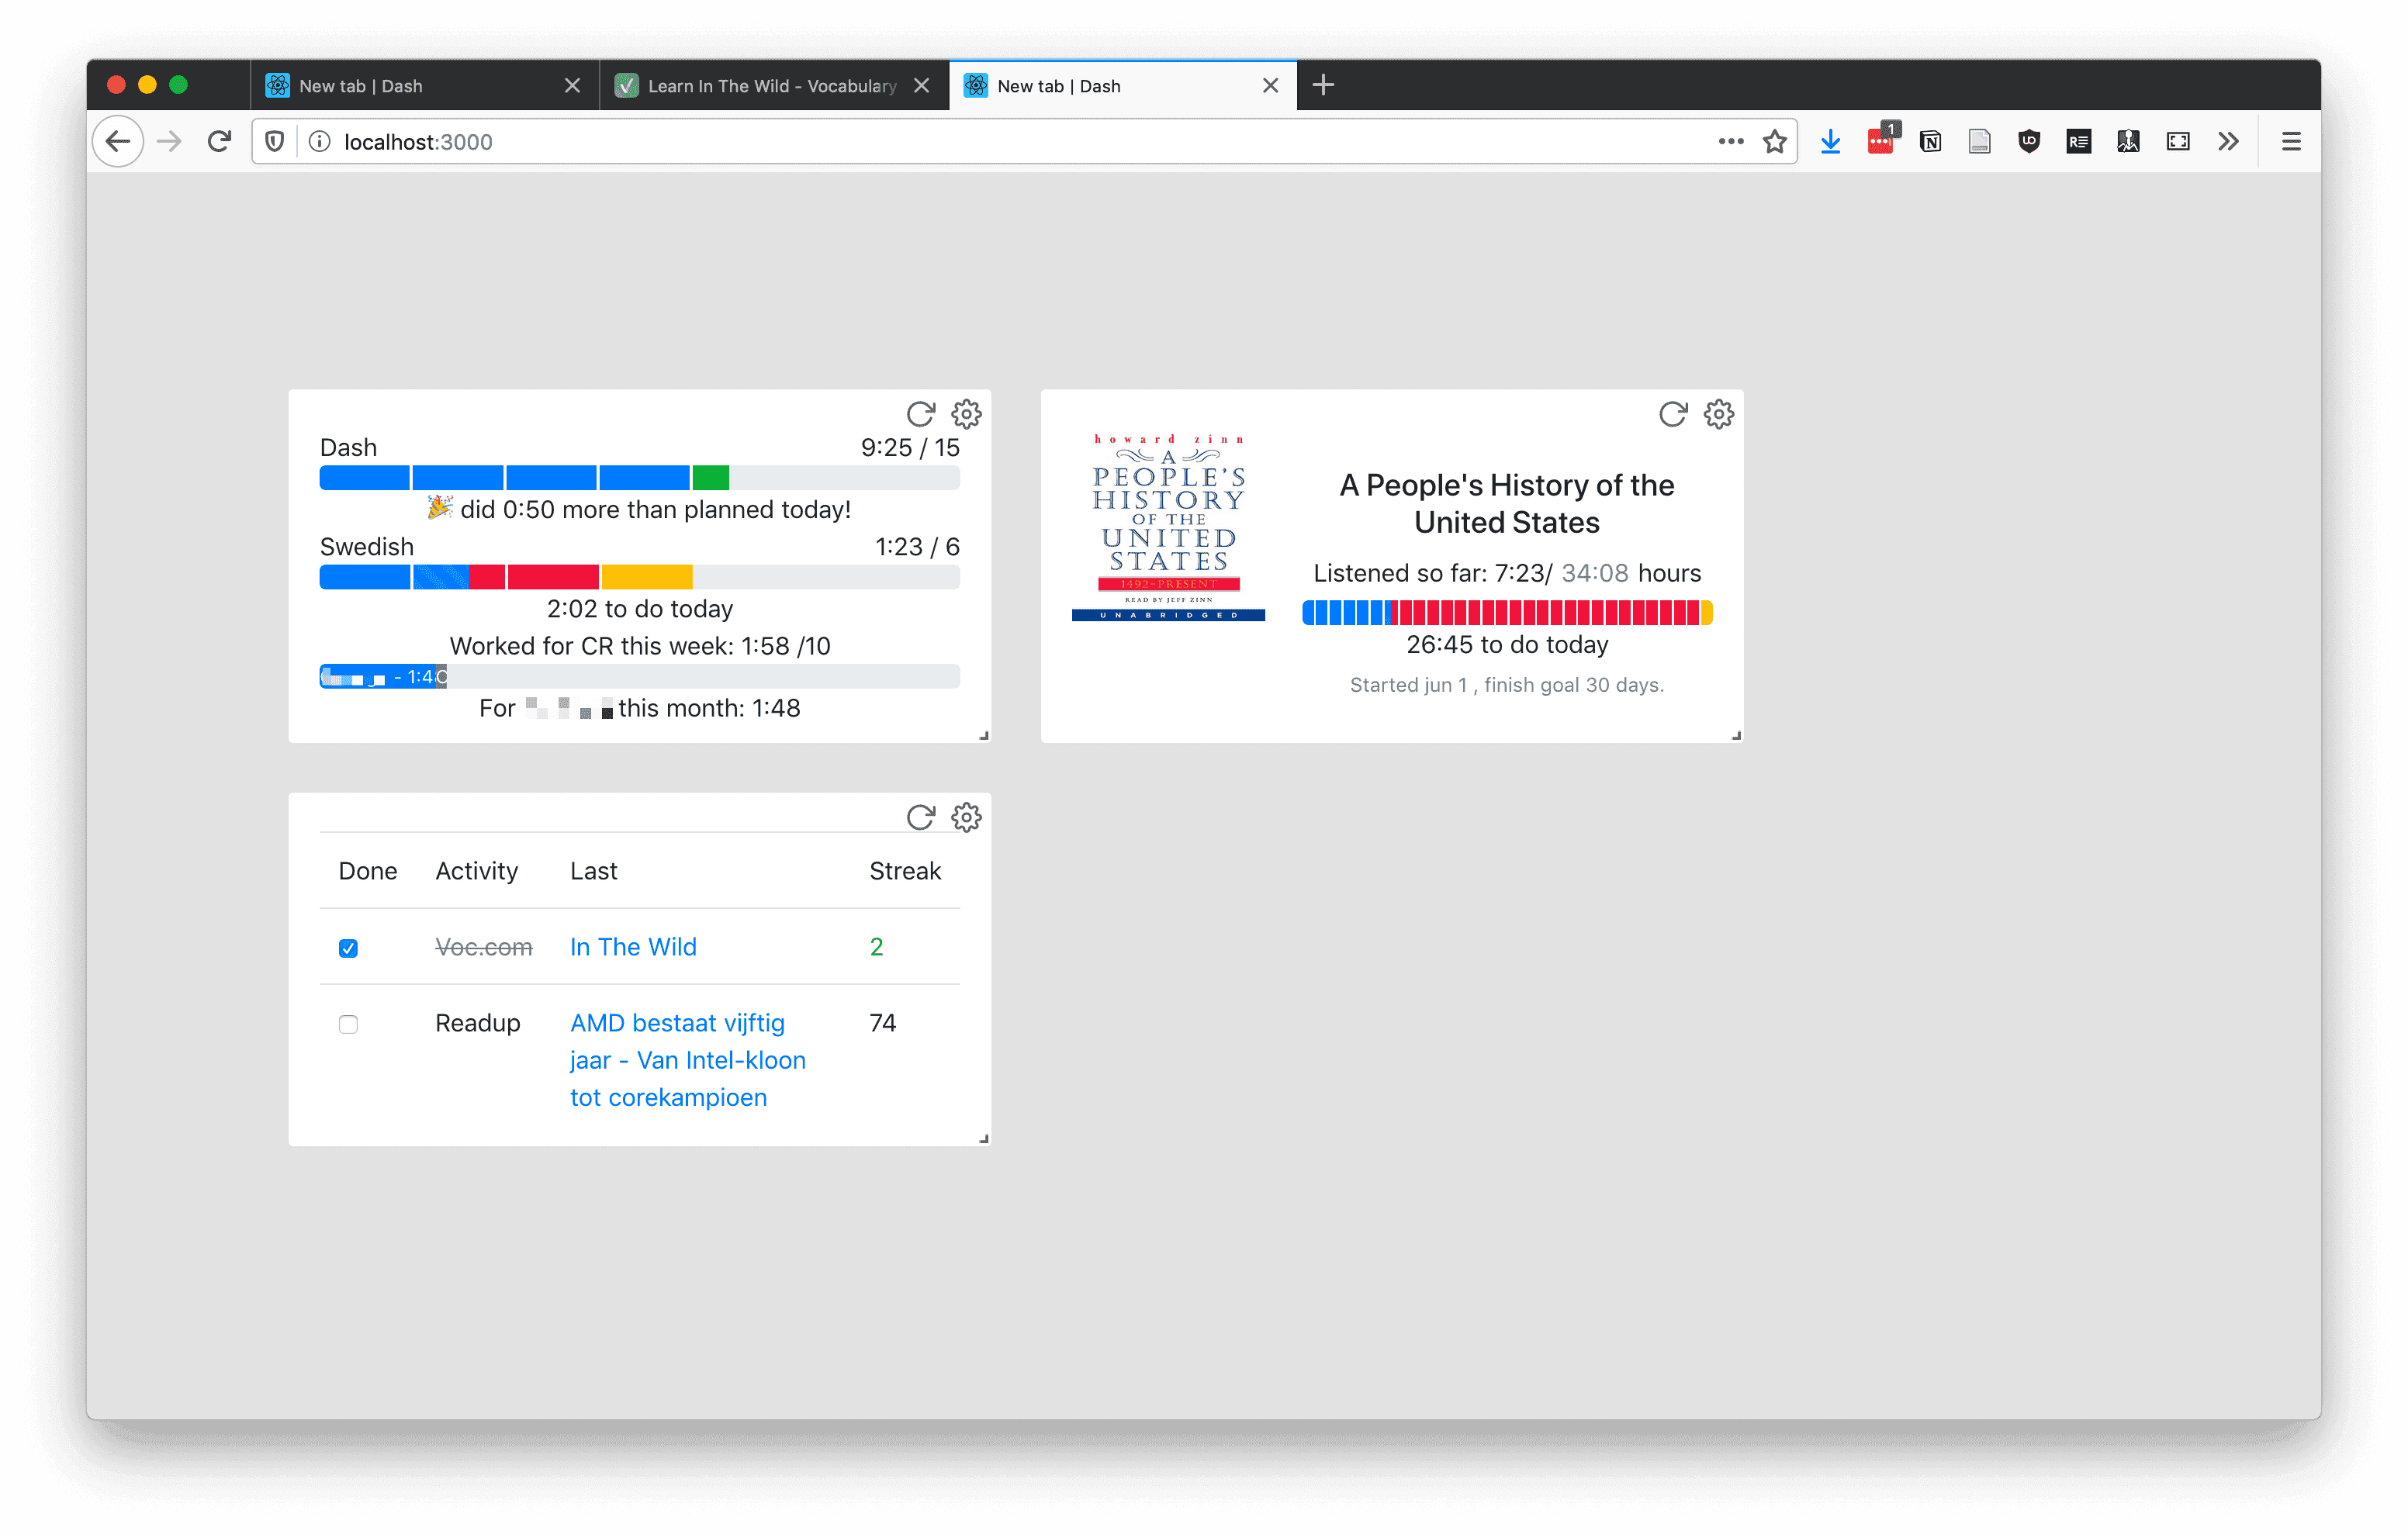 Dash is a browser extension that adds a "new tab" dashboard with widgets driven by personal data from various sources. 

This project originally started as a design exploration in time management in October 2018. When trying to learn a new skill, or reach certain outcomes in a project, consistency is key. _"Practice a little every day"_, _"Write a little every day"_. But reaching consitency is difficult, it relies on balance. Time is scarce. Overspending it on one project takes it away from other projects, a situation I often found myself in (and I still do).

What if you could, ahead of time, plan **timeboxes** for all the projects you wanted to work on in a week, or in a month? And crucially, what if you could also nudge yourself into respecting those timeboxes by geting frequent and instant feedback on your overall progress?

At the outbreak of COVID-19, and while procrastinating on my thesis work, I experienced a surge in interest to work on this again, and I started implementing a proof-of-concept. Iterating on the above idea, I first built the **"Time Goals"** widget. Later, I built two more related widgets: a "streaks" widget, and an (audio)book-specific time goals widget.

## The Time Goals Widget

 The Time Goals widget consisted of two parts:
- Live time tracking data for my projects, which came from two sources; the [Toggl Track API](https://developers.track.toggl.com/) for my personal projects at the time, and the [Harvest API](https://help.getharvest.com/api-v2/) for my Columbia Road work projects at the time.
- Time goals, which I set in the dashboard, for projects I wanted to commit to at the time. For example, "I want to learn Swedish for 6 hours per week" would be a goal.

The widget then showed my progress towards the goal of each project in a progress bar, dividing the time goal equally over each weekday. With colors, it visually represented how much I was on- or off-balance:
- <span style="color: blue;">Blue</span> meant: completed according to schedule
-  <span style="color: red;">Red</span> meant: overdue, should have been done.
-  <span style="color: gold;">Yellow</span> meant: to be done today.
-  <span style="color: green;">Green</span> meant I "overshot" the goal, or did more than planned given this distribution (can be a bad thing!).

I used this for about two months, and I felt it did help me to achieve a better balance. A new tab page is one you see often, so I would get reminded of my undershooting and overshooting all the time, which would steer my behavior.

I wanted to take this step further, according to my original designs: what if you didn't just set a fixed number of hours as a project goal for a week/month, but would also integrate it with your digital calendar?

Then the tool would help you in more ways:
- When planning, you could add, rescale and reshuffle calendar events for each project, until each project reached the desired quota of time: _"Is your calendar sound? Does it match your intentions?"_
- Your expectations for a day would be more fine-tuned: the dashboard wouldn't nudge you to work on a project on Tuesday or Wednesday if you wanted to complete it all Thursday.
- When your calendar changed, as it often does, you would see the impact it had on your overall distribution of time for a week/month, and you'd be better informed to make resulting changes.

But while getting somewhere, I had not finished this part of the implementation. Along the way though, I saw more opportunities for this Dashboard that I did try out.

## The "Streaks" Widget

Not everying ought to take a distinguishable number of hours in a weekly plan. A habit can be a small thing, like practicing on Duolingo for a few minutes each day. For these types of commitments, I added a "streaks" widget.

I picked two external services that I wanted to use daily at the time. Both had a "streaks" concept of their own.
- First, there was Vocabulary.com, the object of my [Vocabulary.com Enhancer tools](/projects/vocabulary-com-tools/). The entry would also link to my last-practiced list, so I could directly jump into the next session. 
- Next, there was Readup.com (for which I didn't work yet at the time). Similarly, it showed my last Starred article.

Neither of these had a public API, however. This sparked some creative web engineering to retrieve arbitrary authenticated web app HTML from these srouces. I used a web extension to proxy privileged requests with my cookies/credentials to my "new tab" page, which inconveniently was a regular web page. It needed to be a regular web page, because I relied on the Service Worker's Cache API to cache requests for quick loads, and that was not supported in extension pages at the time.

## The book widget

The last widget I added was the book widget. I didn't only want to track time spent on my computer, but also time spent learning otherwise: through books, or audiobooks, and bring it fairly into consideration along with the rest.

Using the same proxy extension, I could parse my progress on audiobooks with Audible's web app  (see [this post](/articles/regex-puzzle-either-and/) on a regex challenge therein). I could then set a time goal to finish my book by a certain date. I also worked on fetching progress from Kindle's web app, but if I remember correctly, couldn't sufficiently reverse-engineer the web app to extract my progress.

## Conclusion & legacy

I used a development build of this project for some months as my daily-driver new tab, and enjoyed it! I thought it did help me. However, I got stability problems with some widgets. For scraped "APIs", it counts that if the HTML changes, the app likely breaks, which lead to annoying errors on my new tab. Other work encroached: I submitted my thesis, I became a full-time employee at Columbia Road, and I didn't feel like spending time to maintain and upgrade it to keep it working. Who knows, maybe this will change some day. But not today.

A big year later though, just after my professional stint at Readup ended, I got excited when I learned about Potential. Their idea of a habit _forming_ app aligned well with what I had dreamed of here. When I introduced myself to [CEO Welf](https://www.welf.co/), I presented this project too. I like to think that that helped me get hired, when I eventually also applied totheir open Software Engineer role.